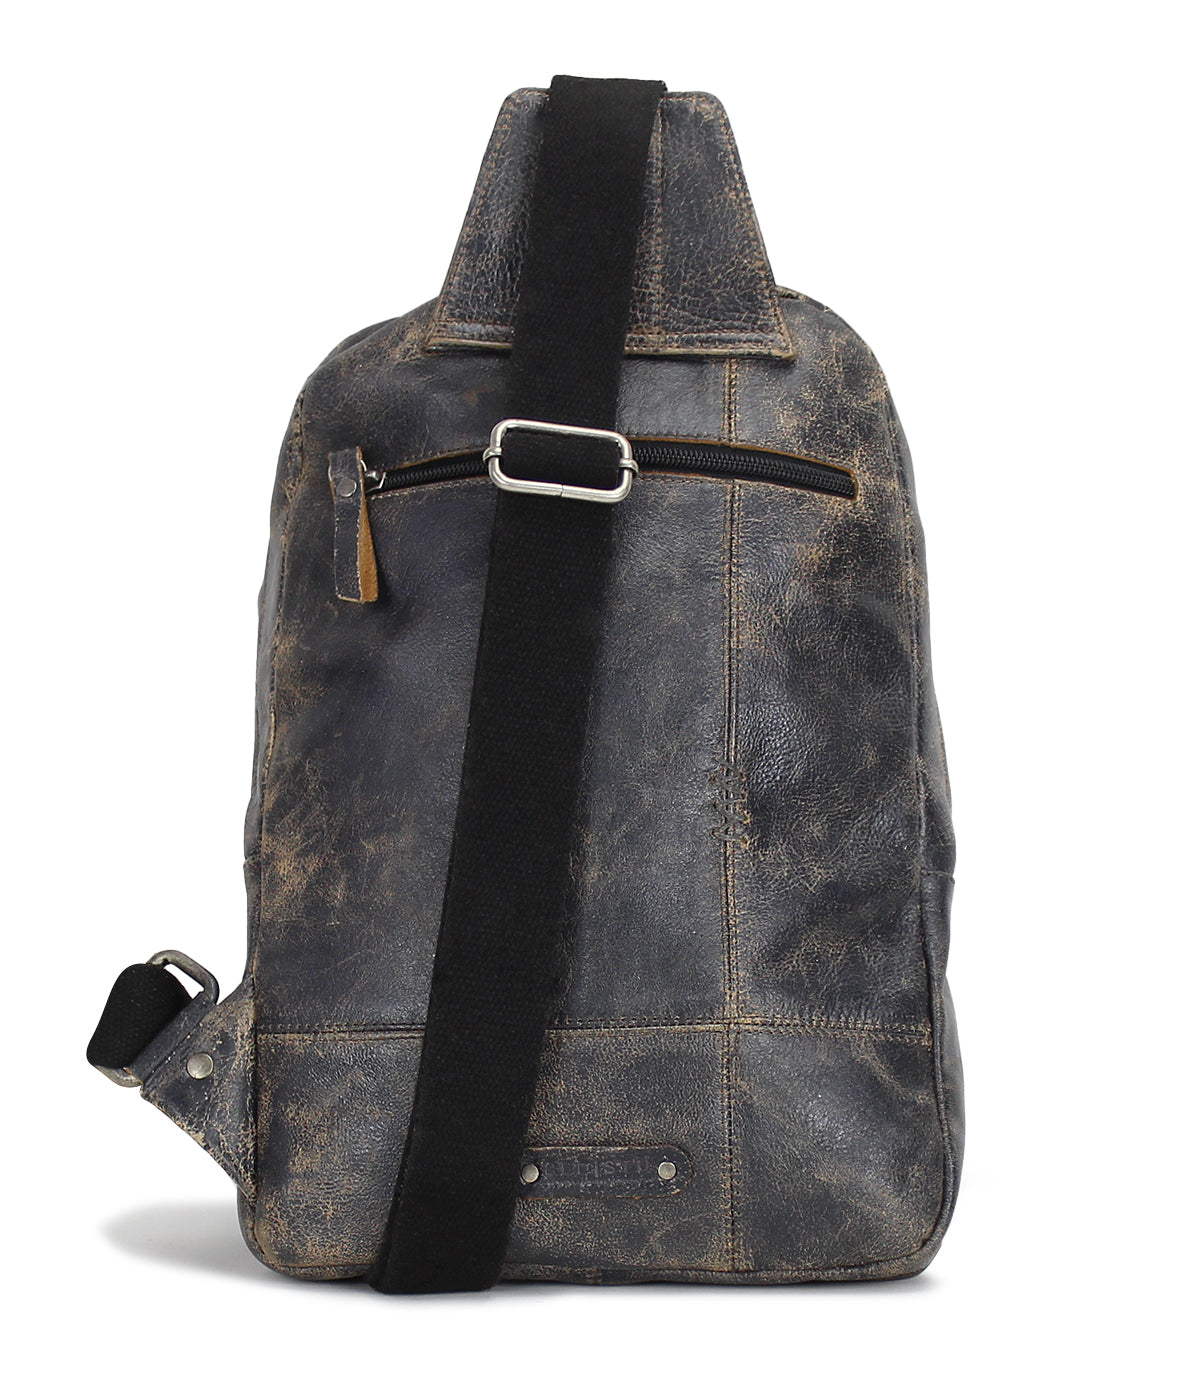 A black leather Boss backpack with a strap, made by Bed Stu.